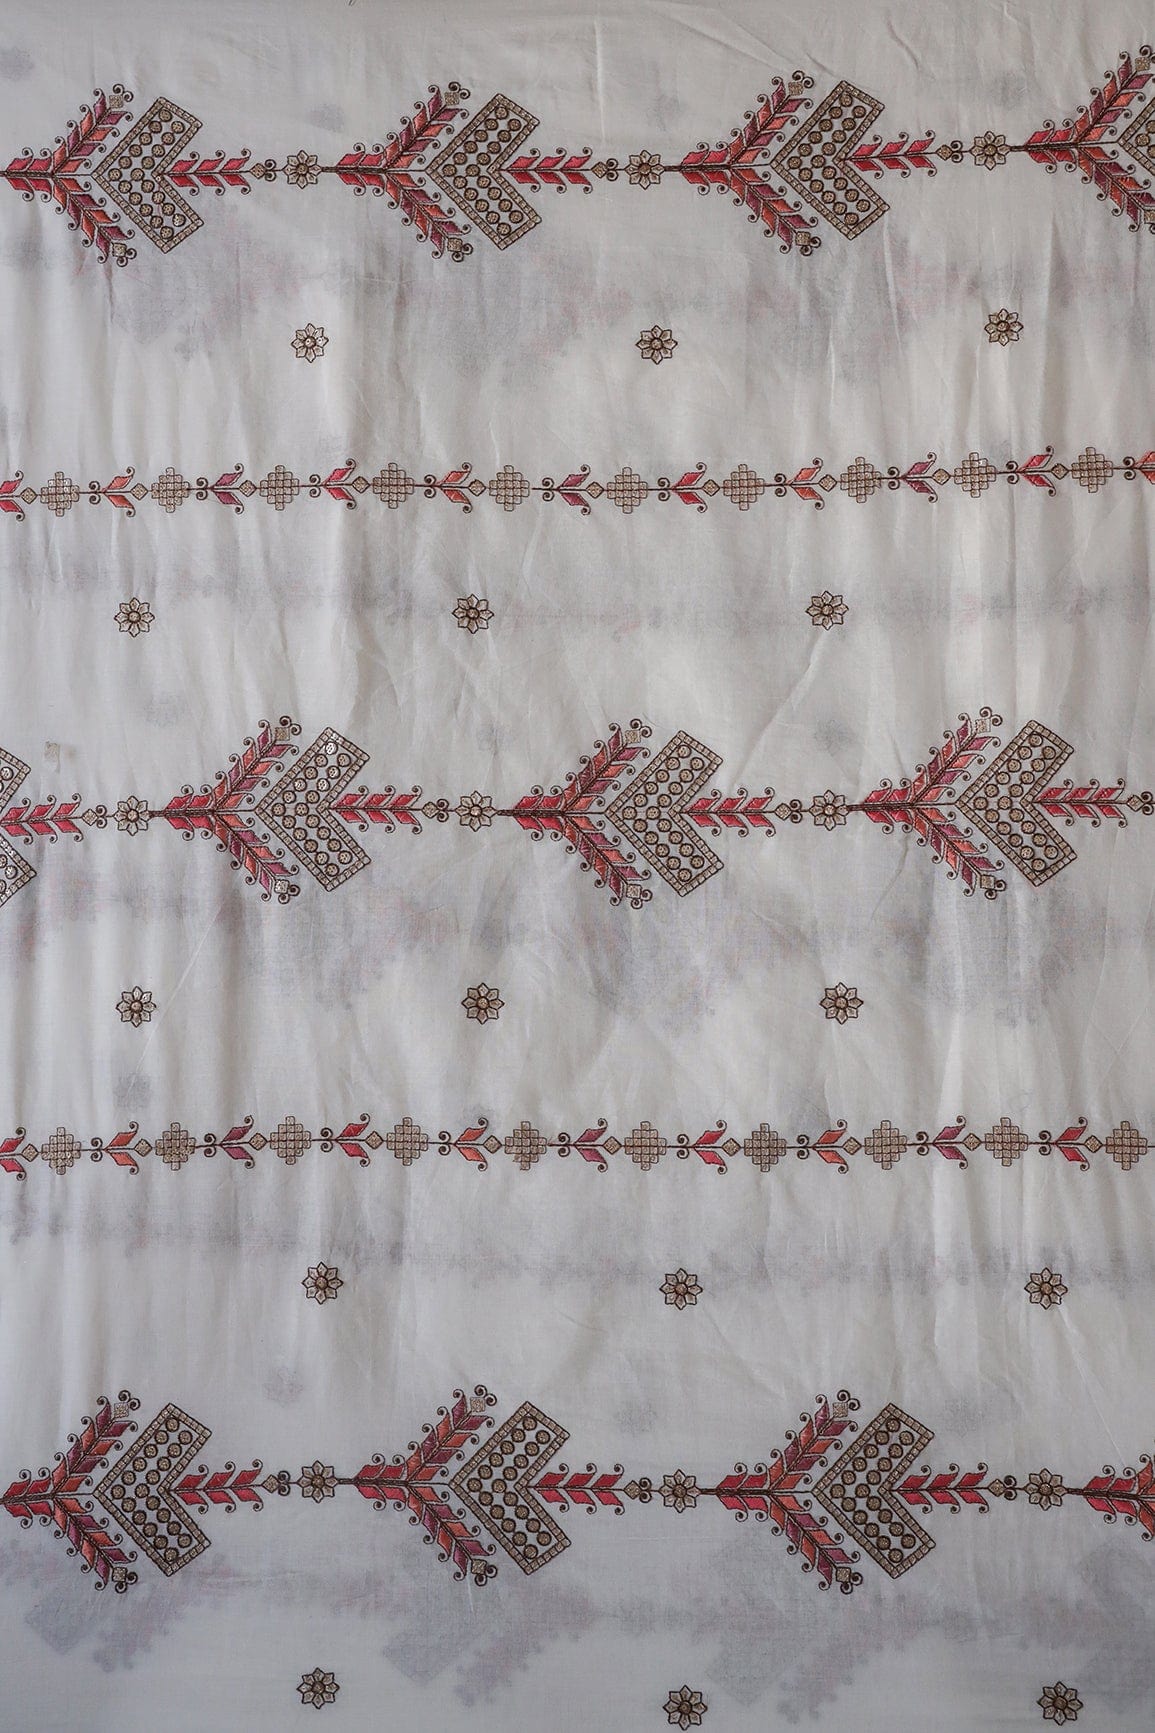 doeraa Embroidery Fabrics Pink And Orange Thread With Gold Sequins Geometric Embroidery Work On Off White Organic Cotton Fabric